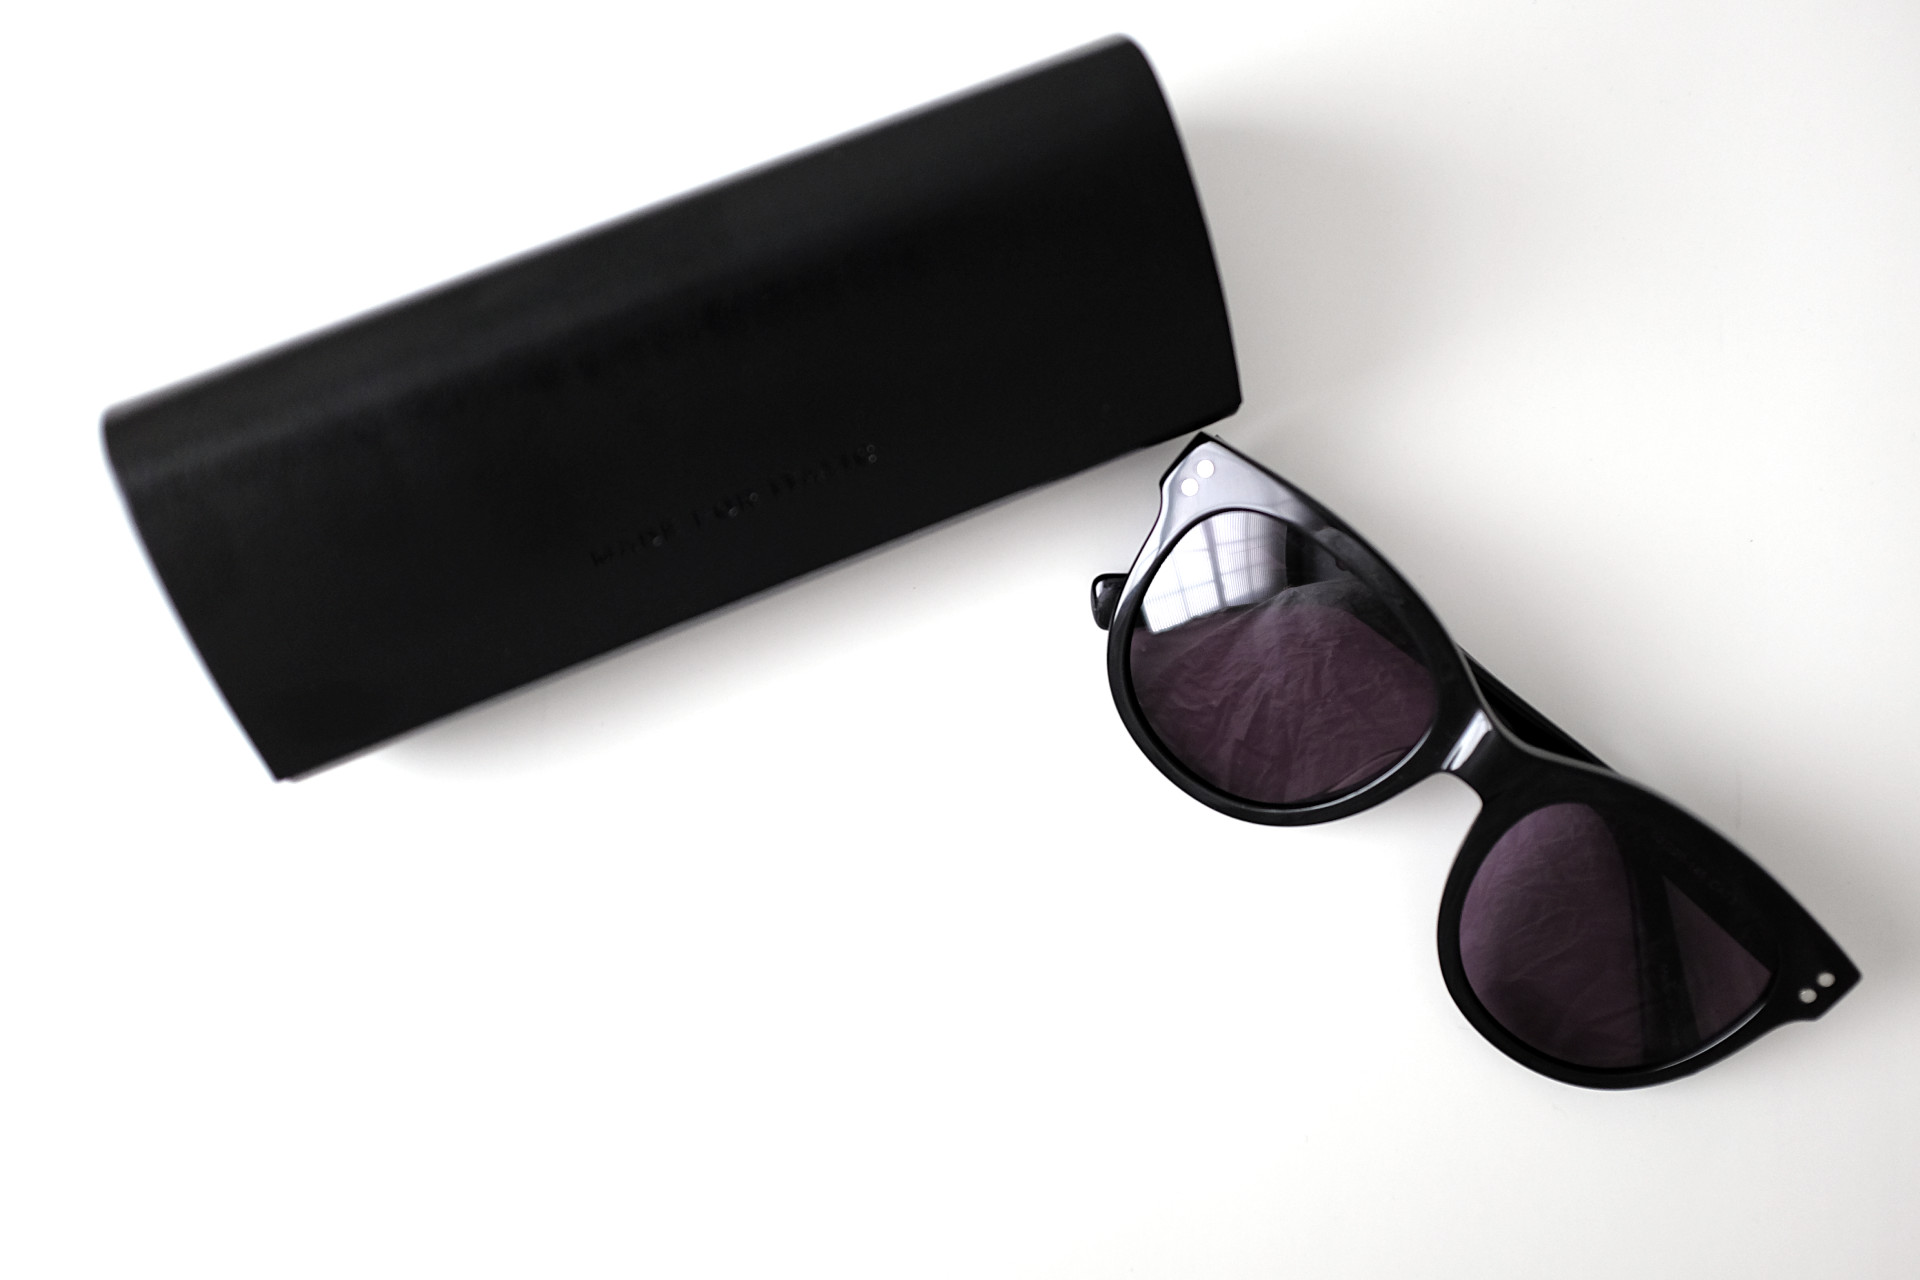 A sunglass case and sunglasses on a white background. The case reads "MADE FOR ITALIC"